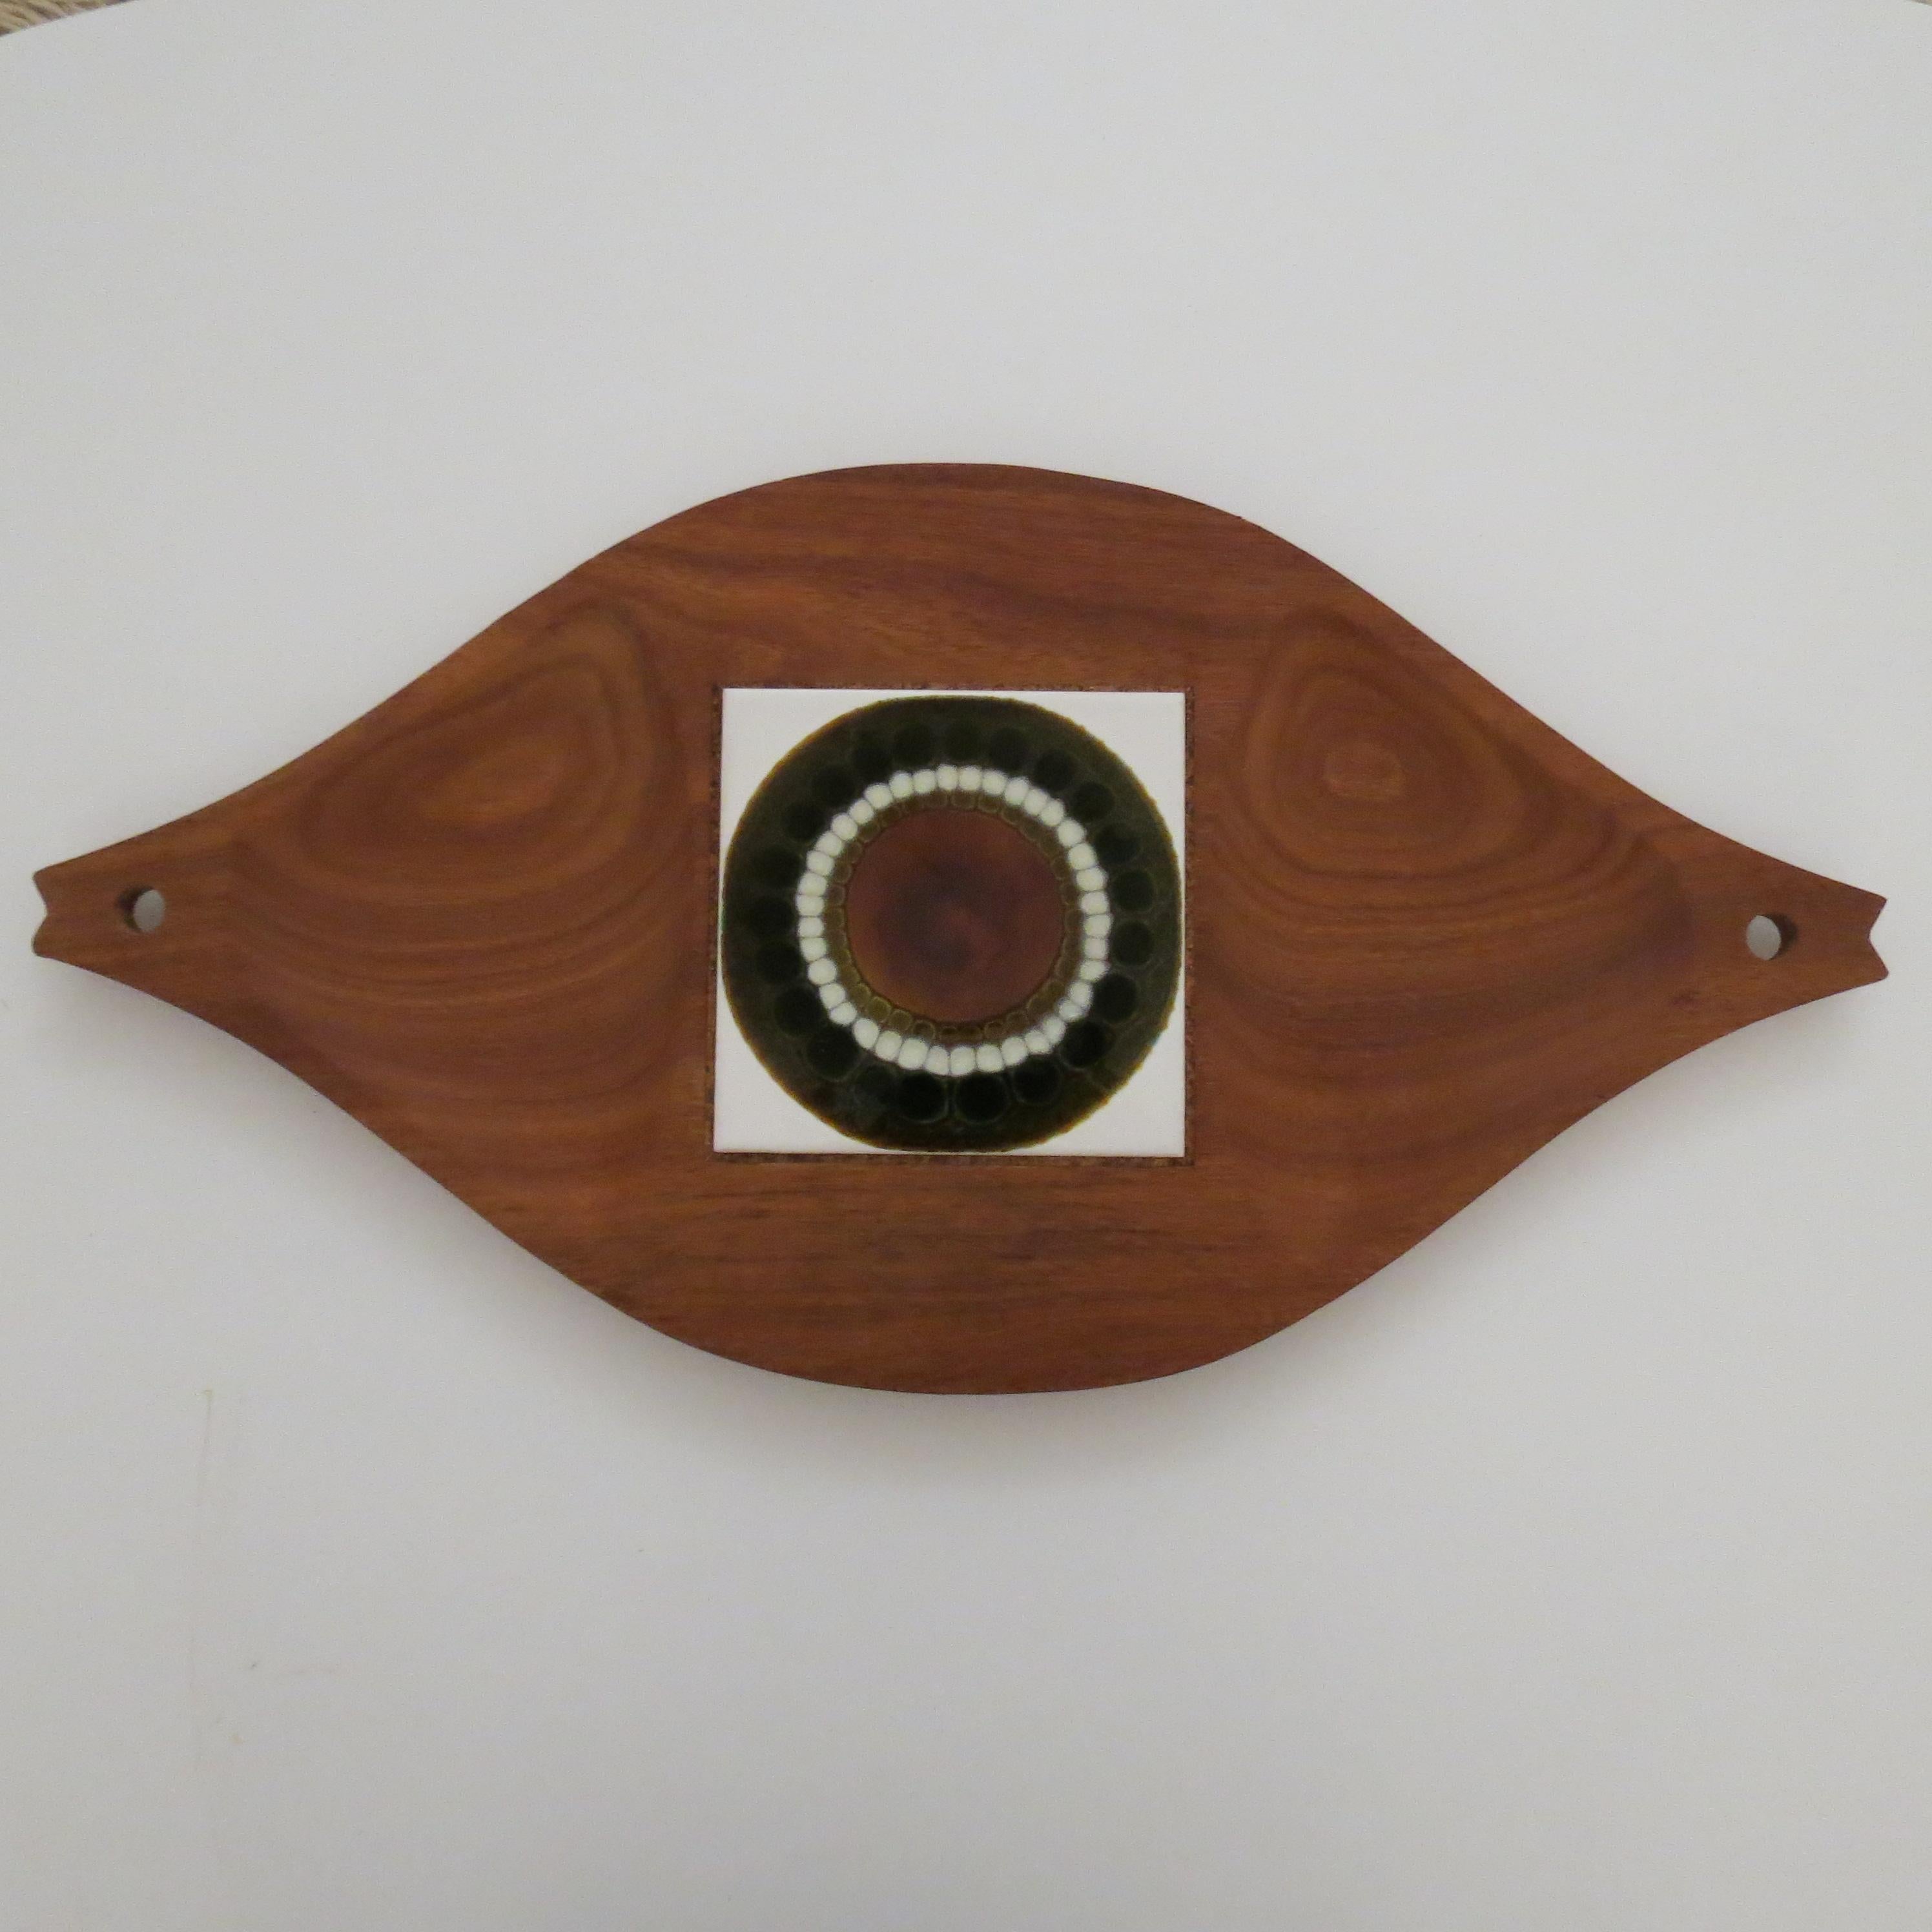 Wonderful vintage Teak serving tray with tile insert.  Solid teak with scooped out dishes either side of an inserted Ceramic tile by Allan Wallwork.  Stamped to the underside A Wallwork 1970s

St1464